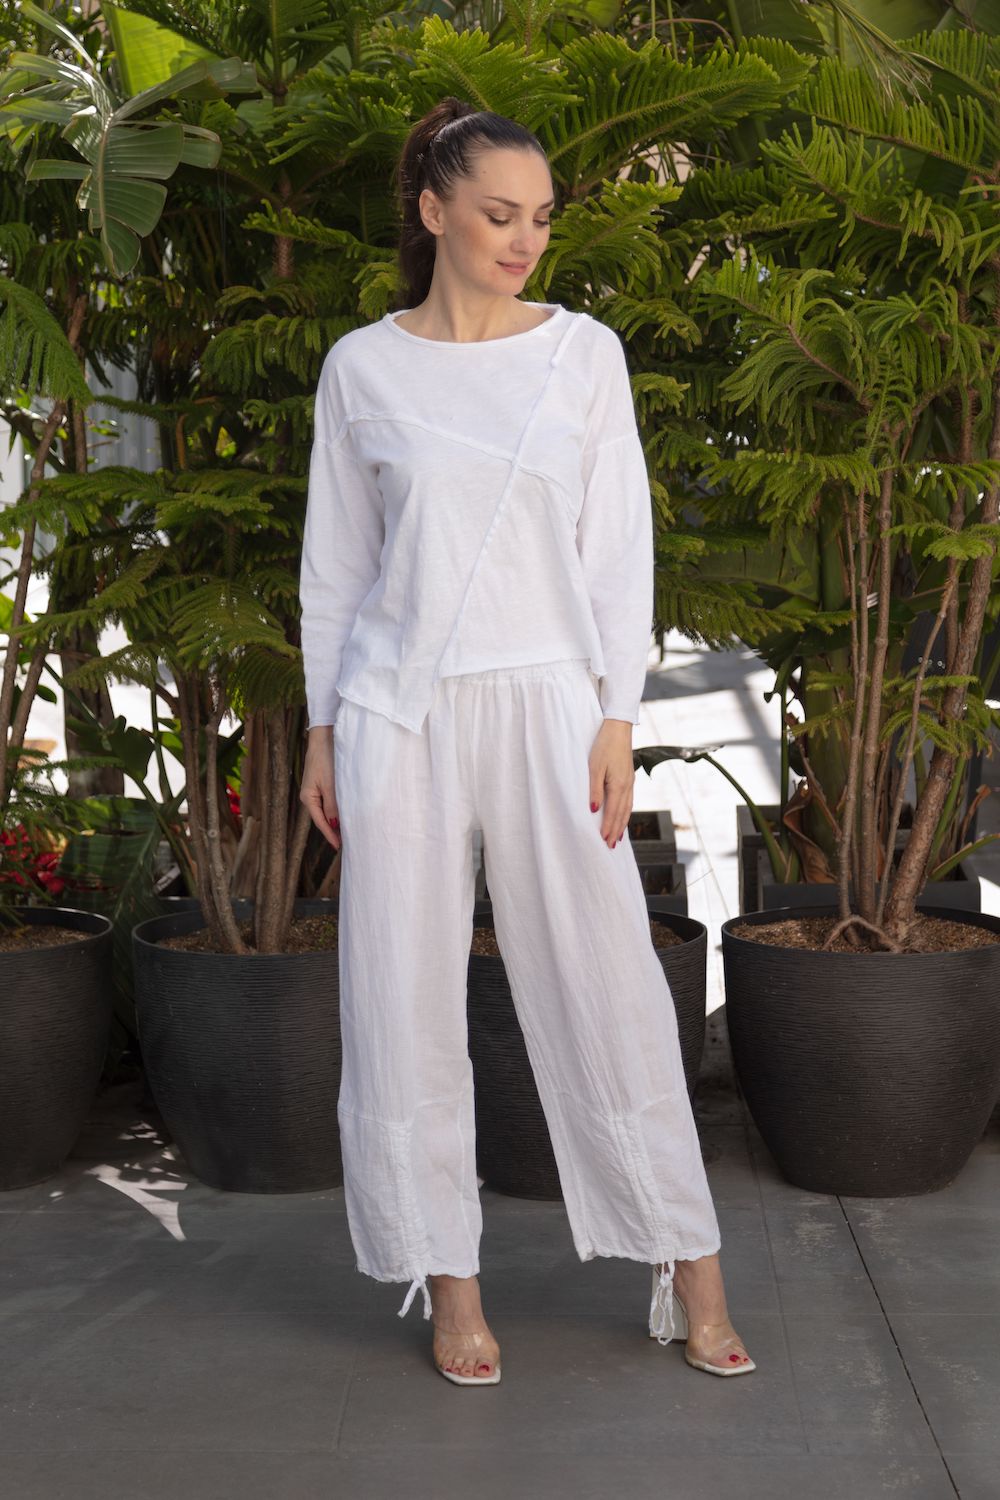 Drawstring Cuff Pants in white